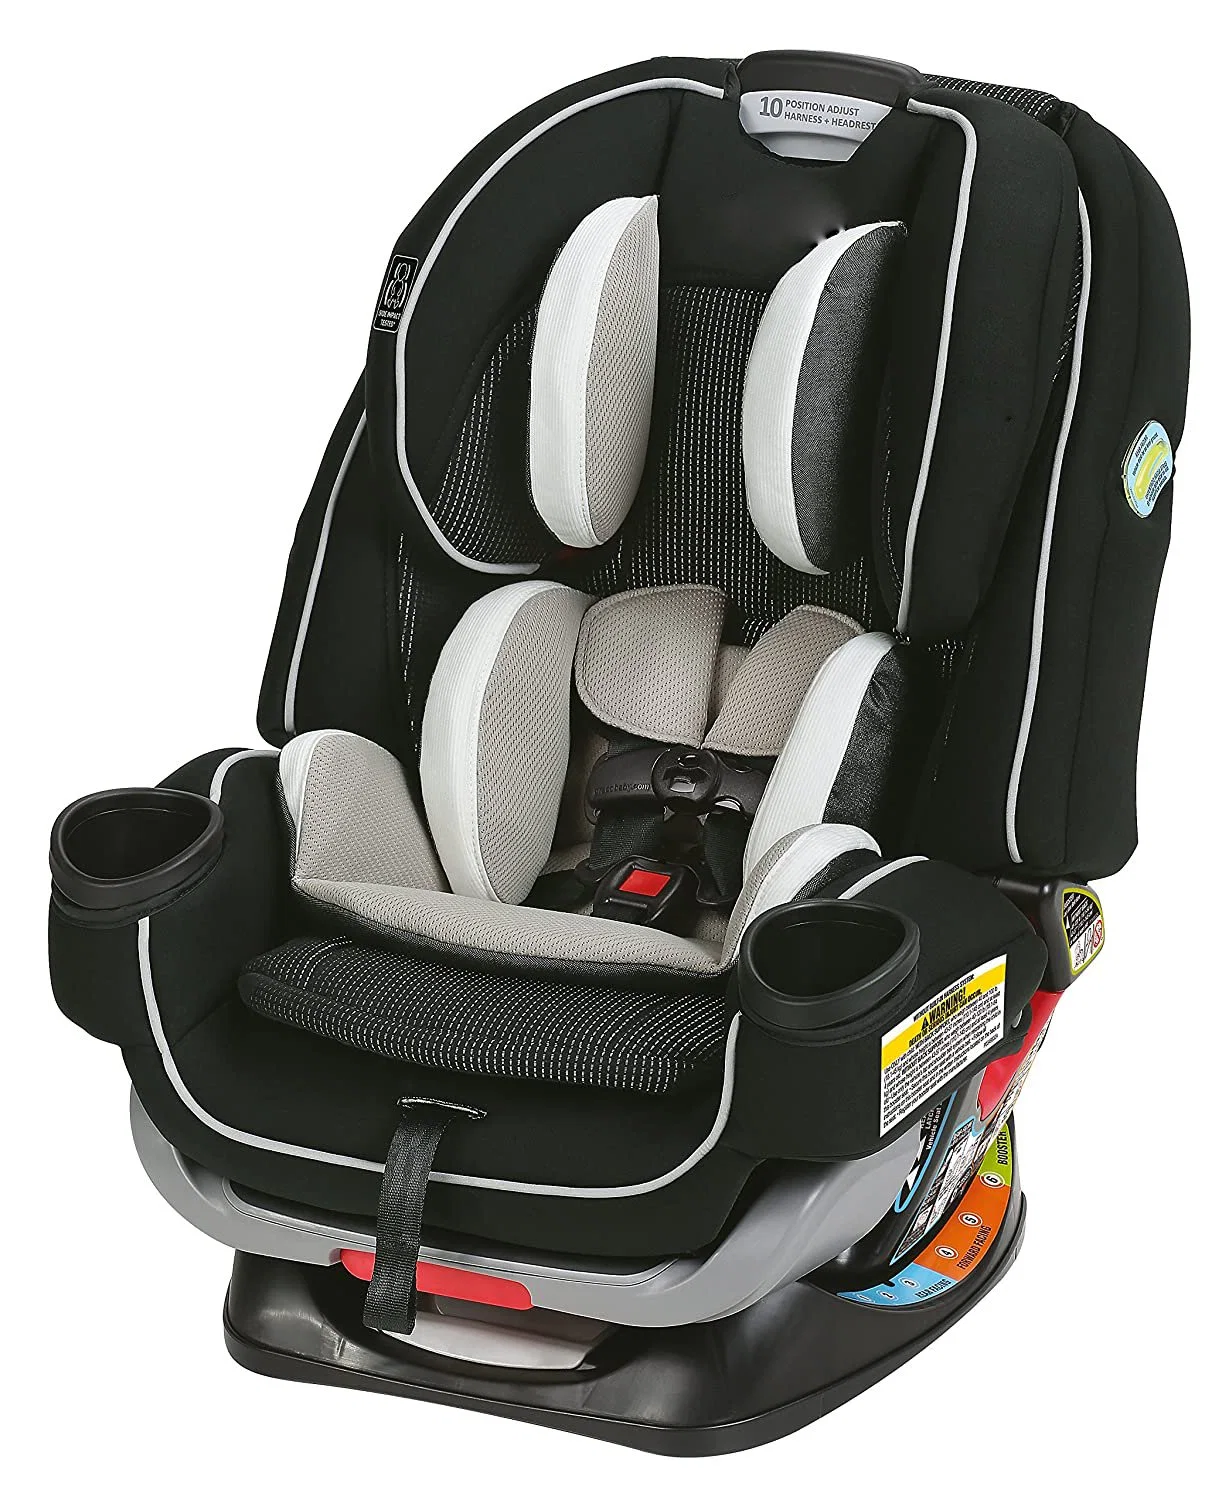 High Quality Baby Car Seat with Isofix+Top Tether